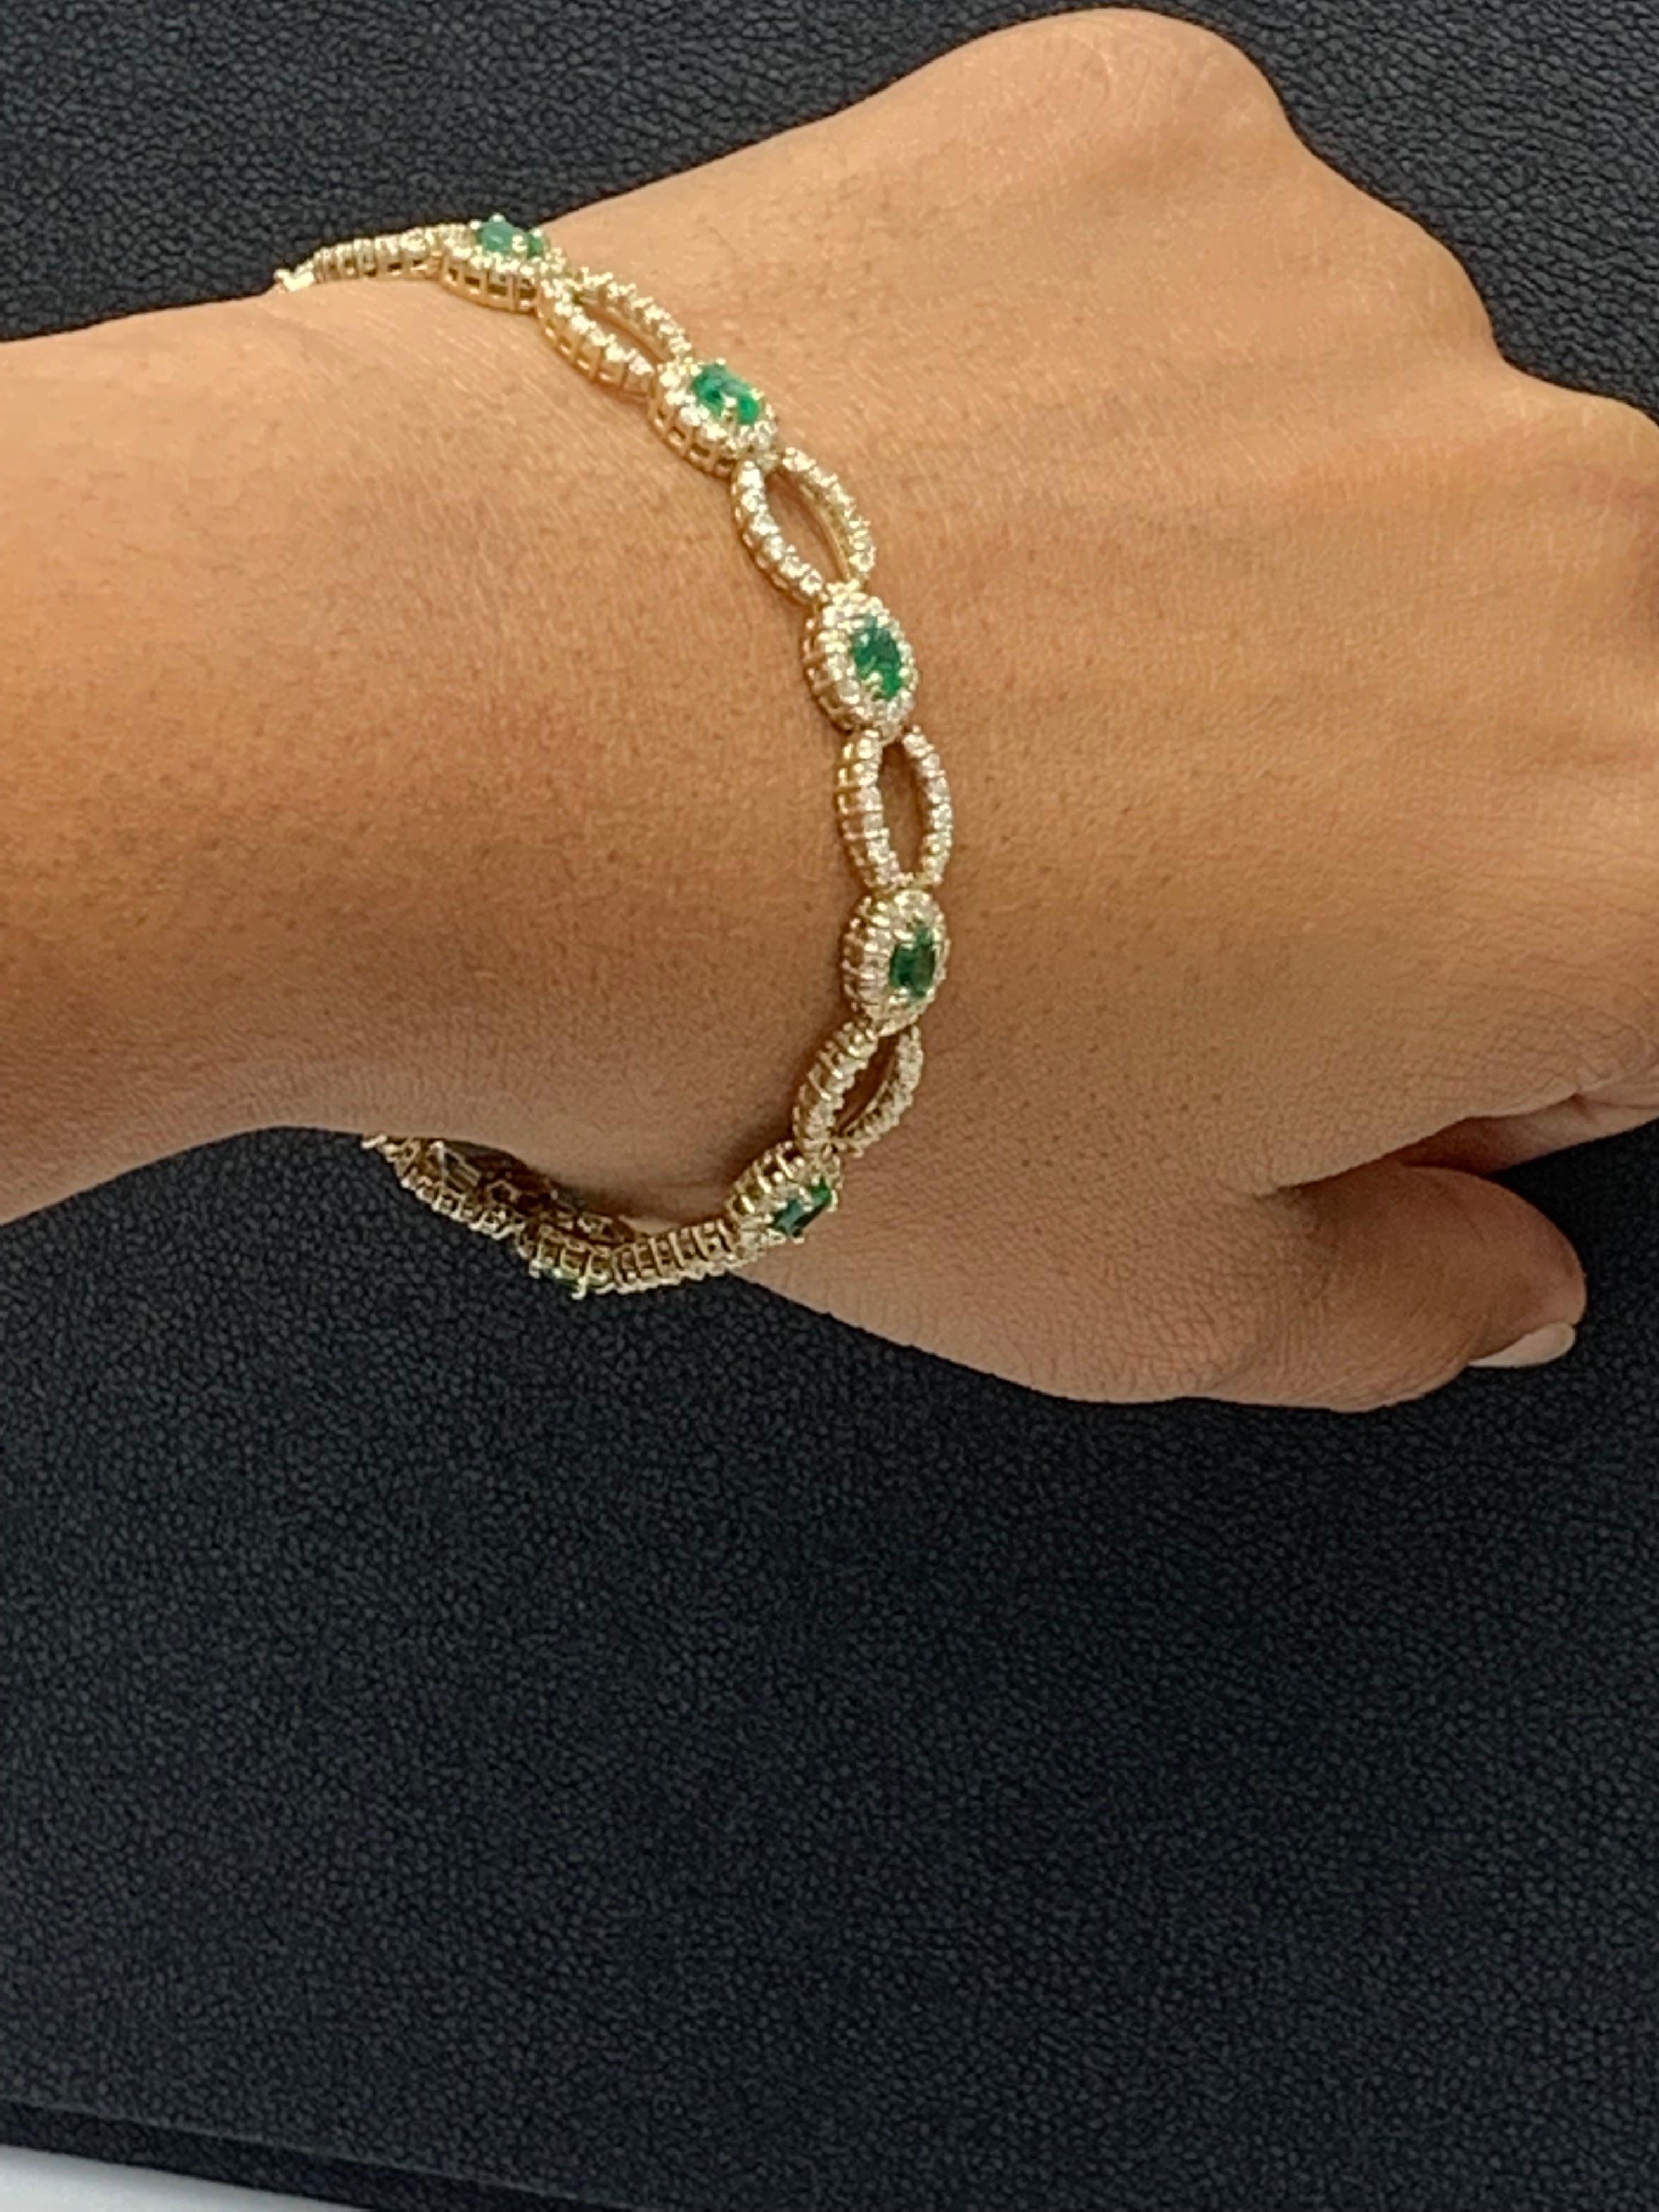 Open-Work 2.13 Carat Emerald and Diamond Bracelet in 14K Yellow Gold For Sale 7